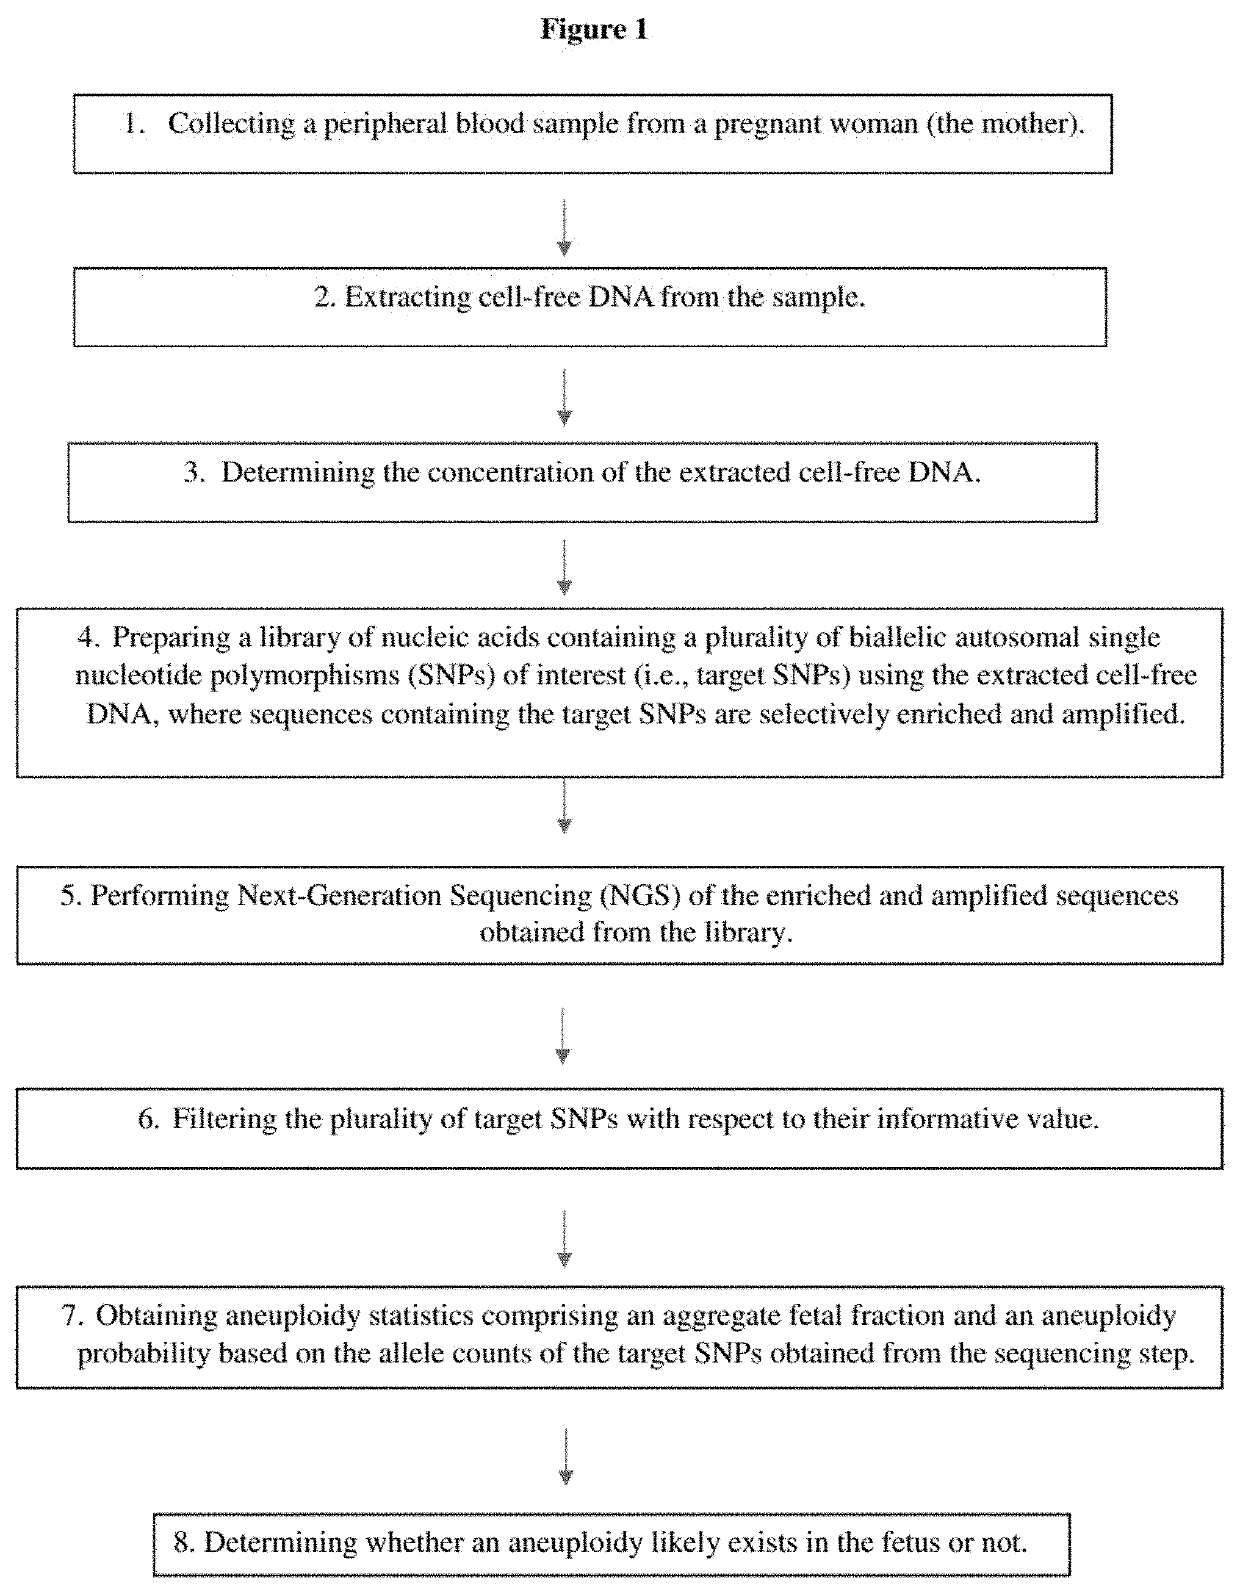 Methods for non-invasive prenatal determination of aneuploidy using targeted next generation sequencing of biallelic snps